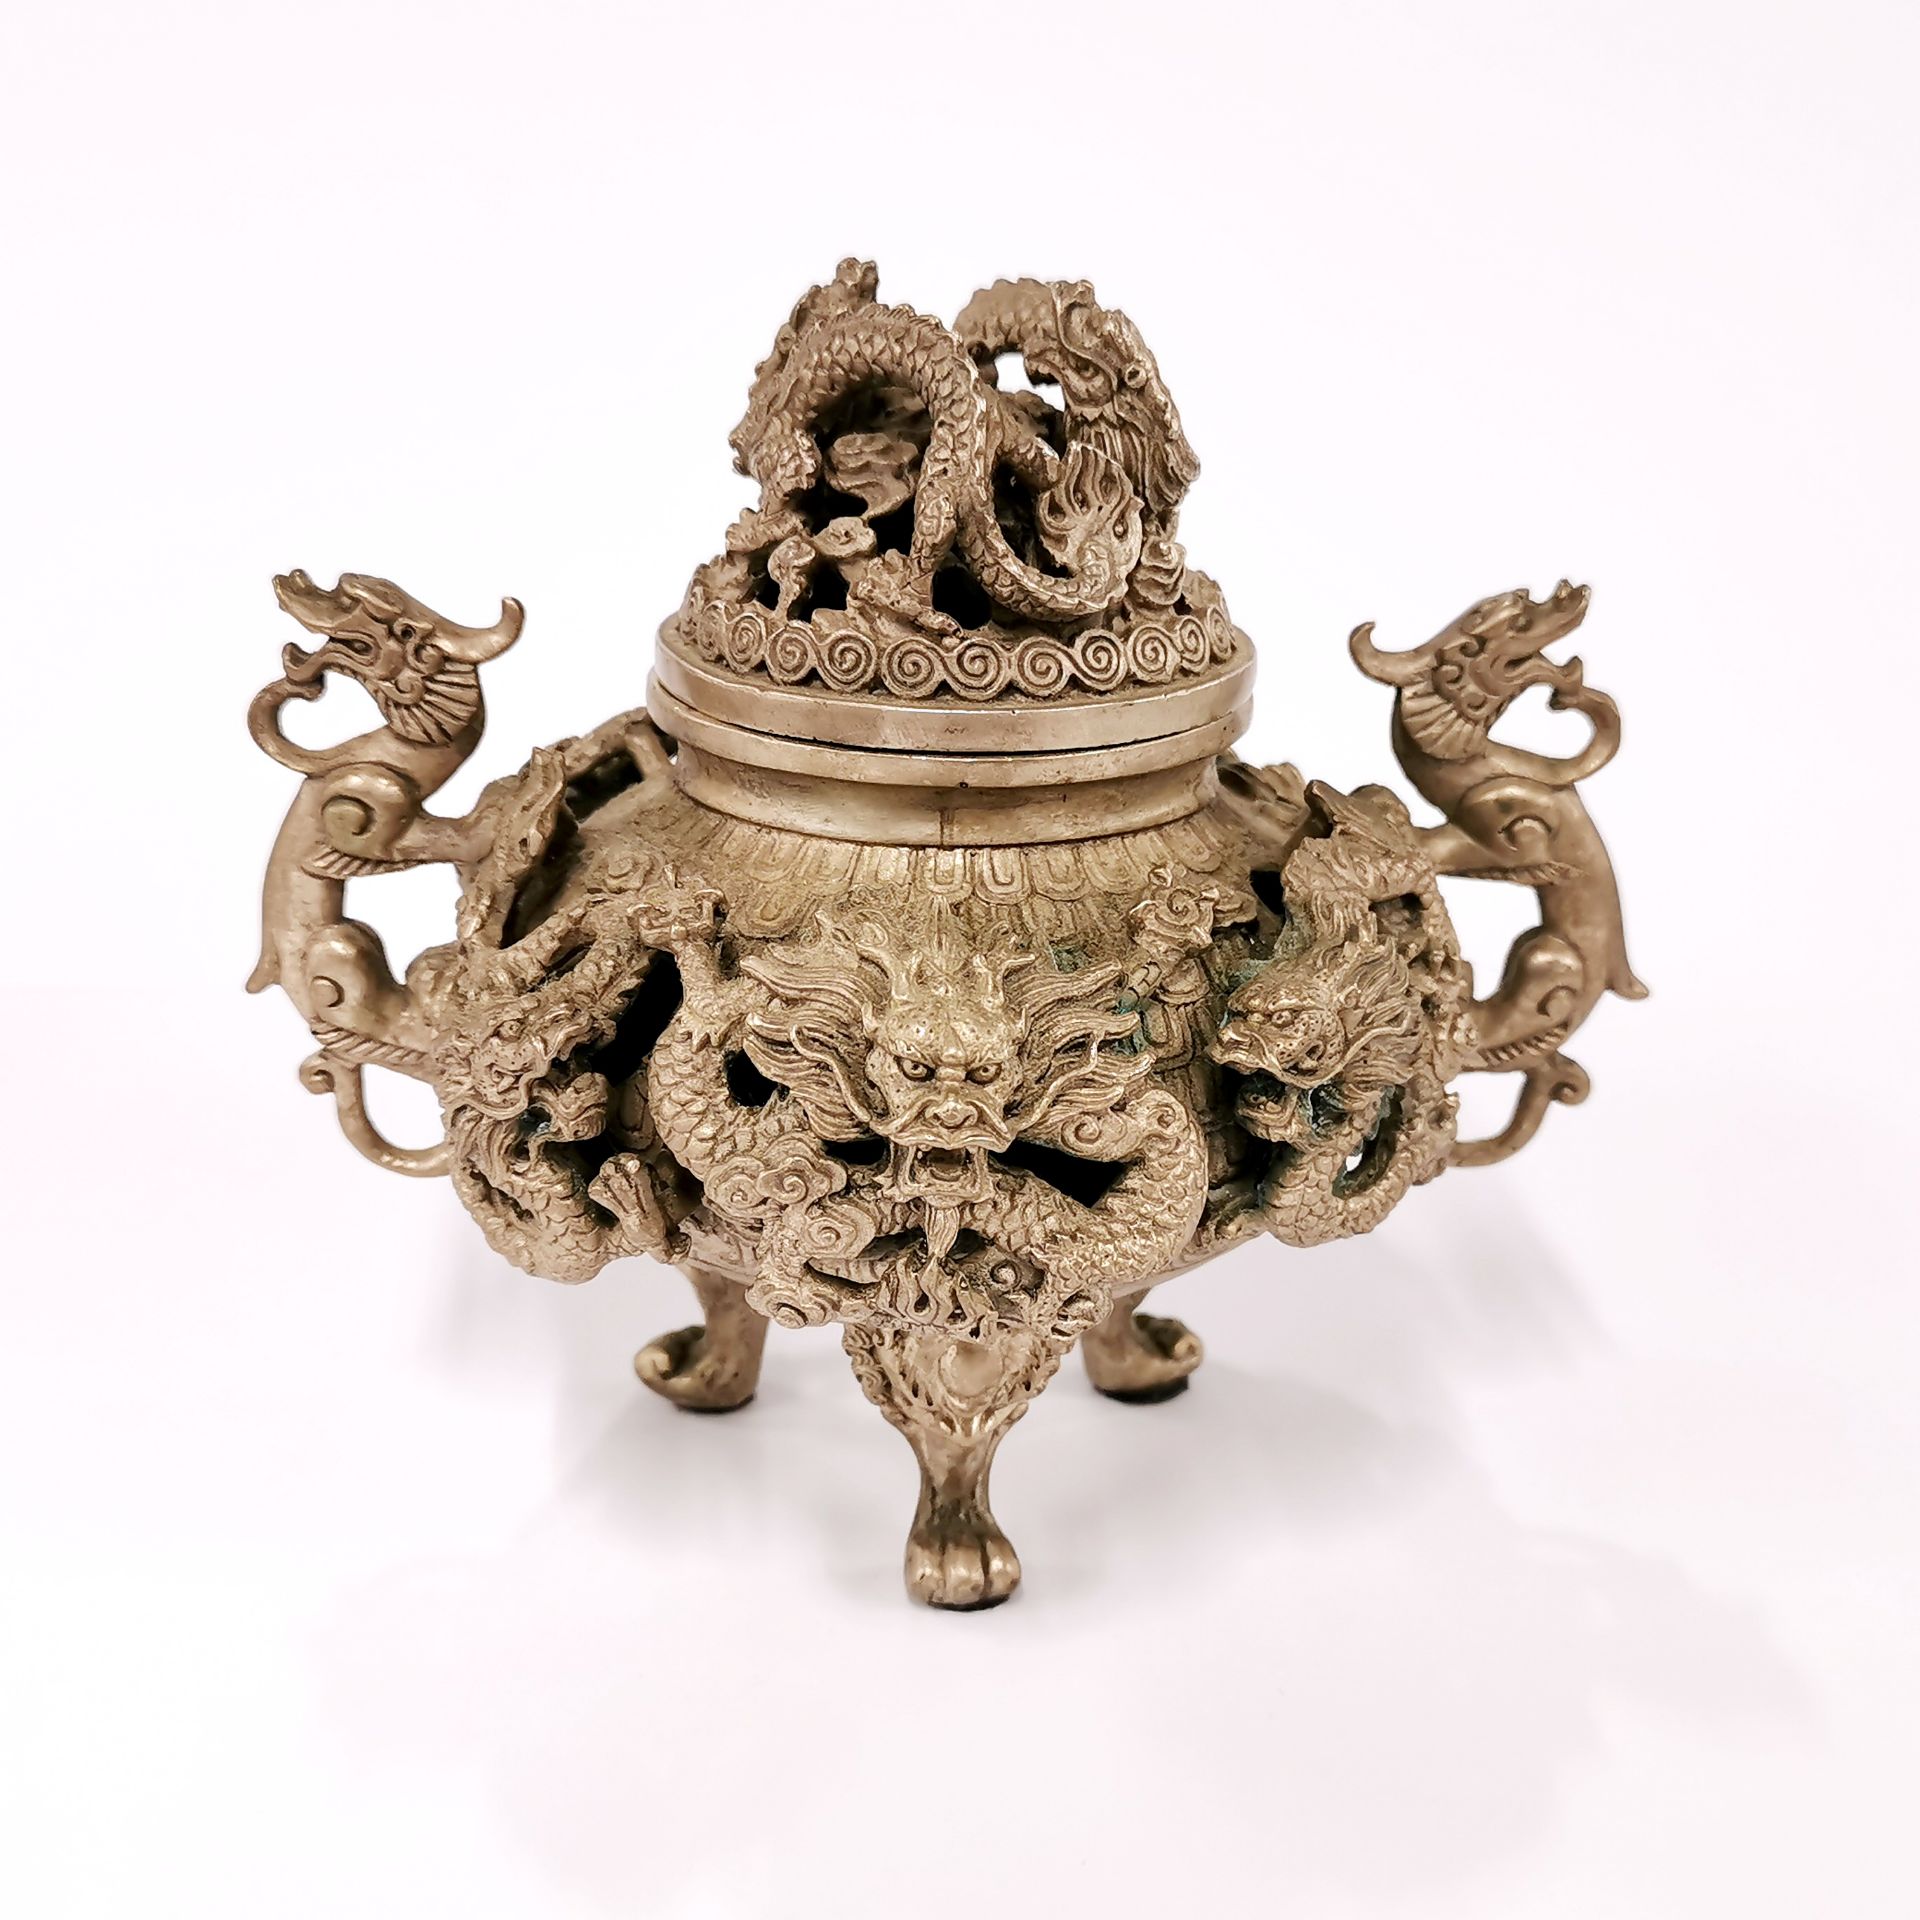 An ornate Chinese silvered metal dragon censer, H. 16CM.